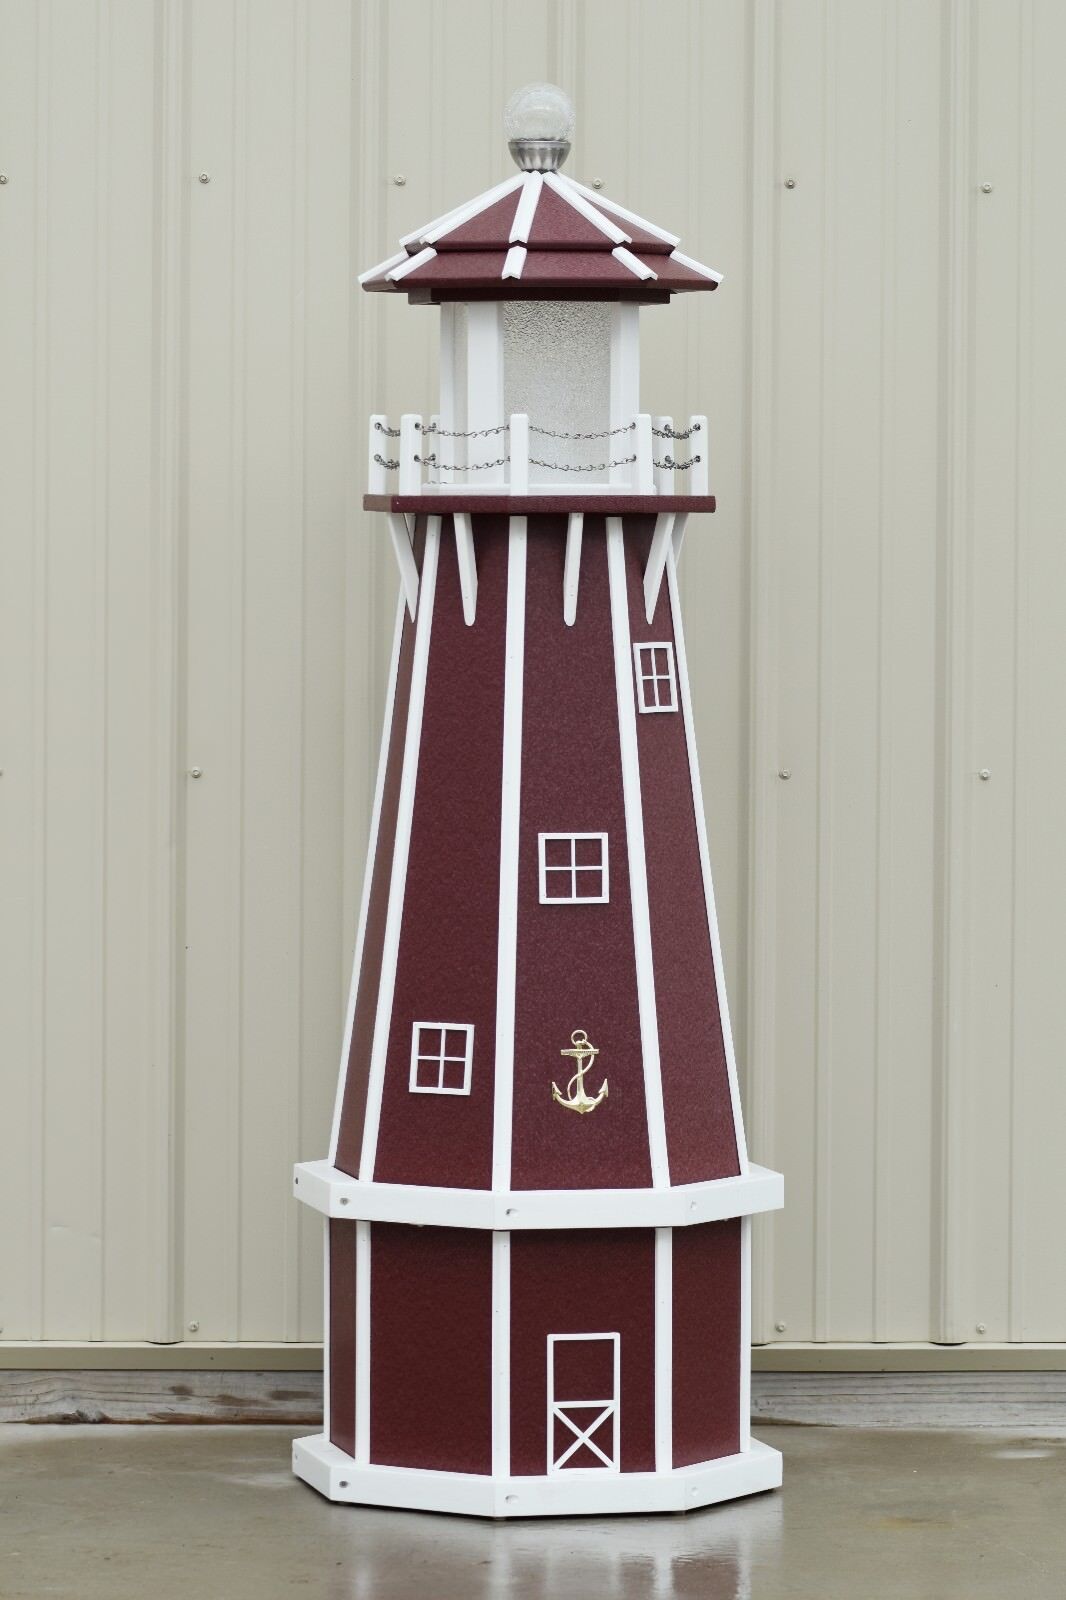 5' Octagon Handcrafted Polywood Lighthouse (cherry/white trim)